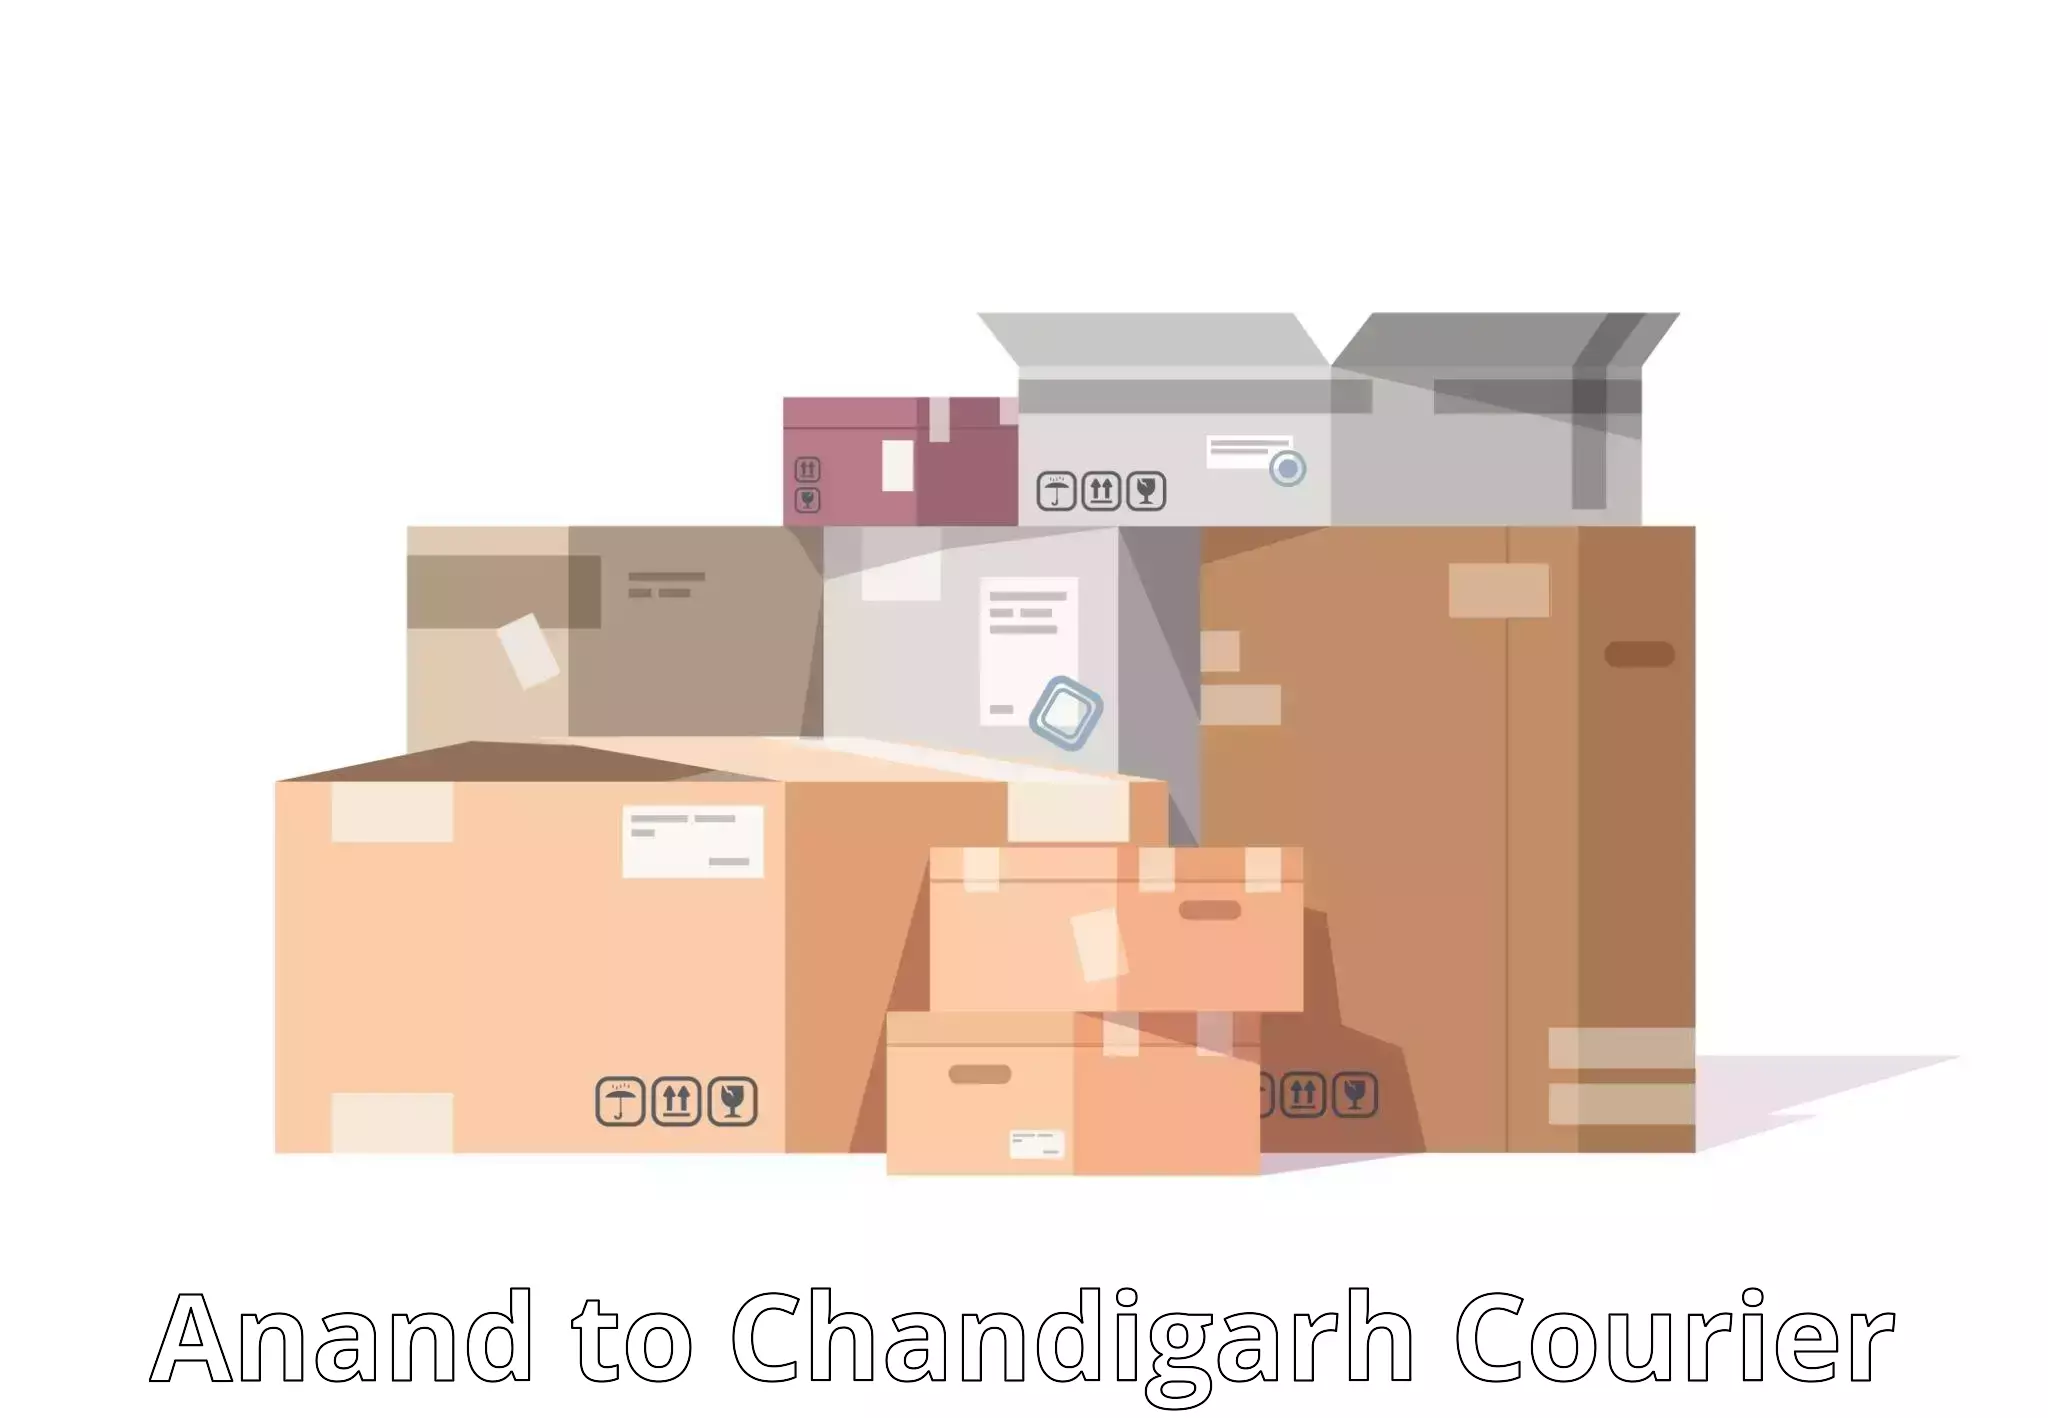 Express logistics providers Anand to Chandigarh